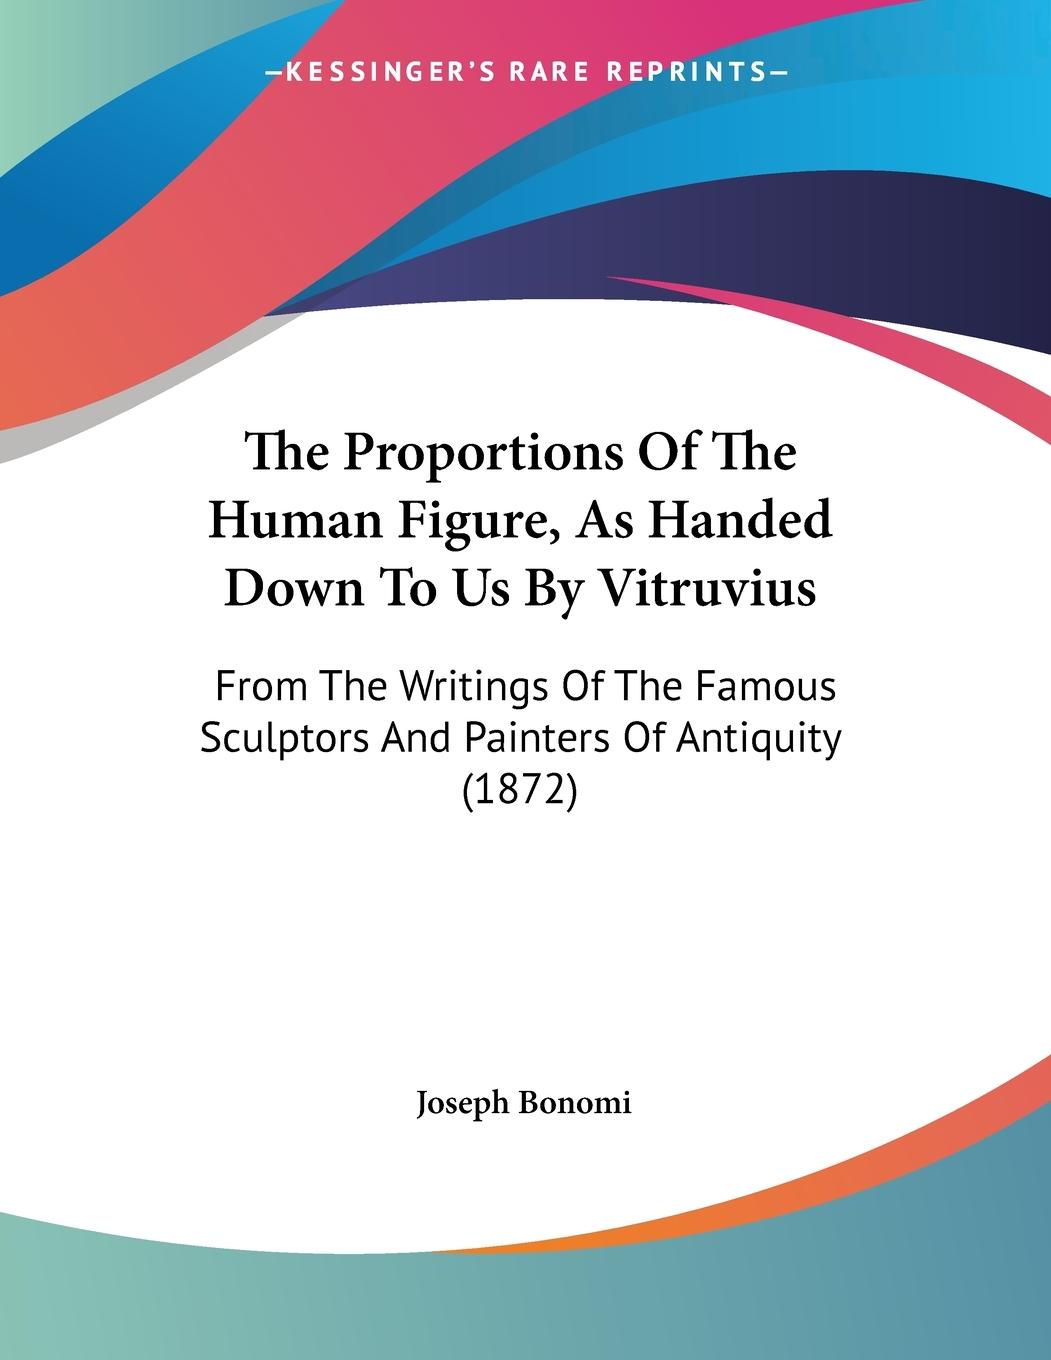 The Proportions Of The Human Figure, As Handed Down To Us By Vitruvius - Bonomi, Joseph